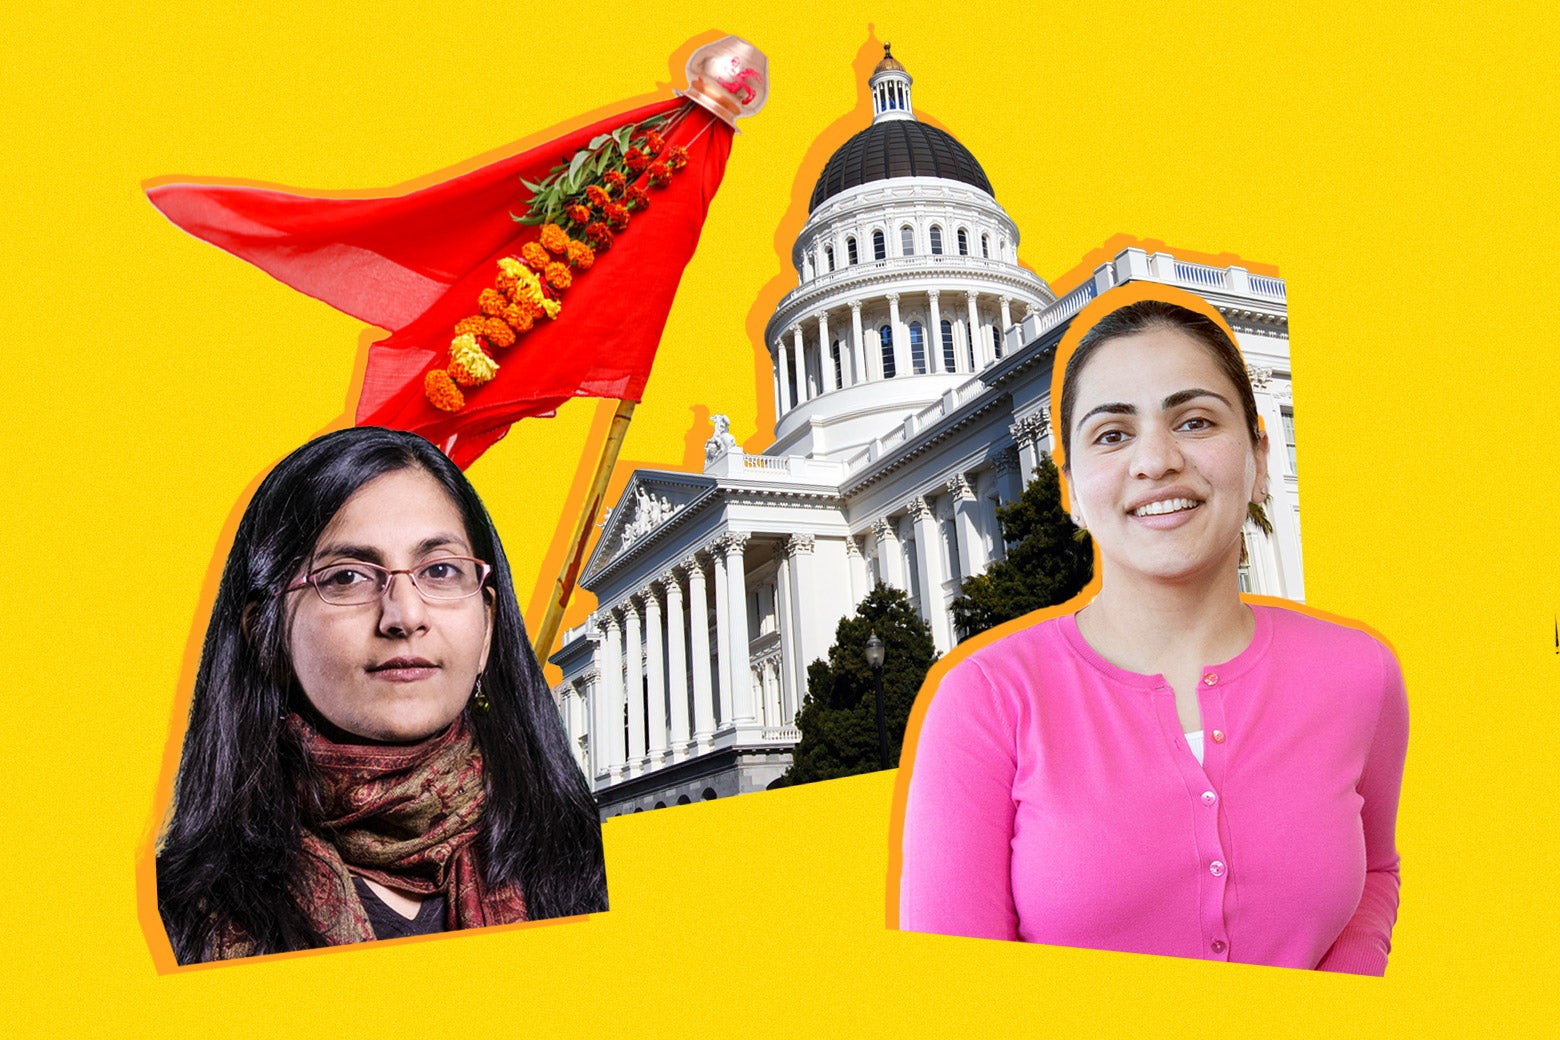 A photo illustration featuring Seattle City Council Member Kshama Sawant, left, and California state Sen. Aisha Wahab, right, who have pushed for anti–caste discrimination legislation in their jurisdictions. The RSS organization's saffron flag and the California legislative building can be seen in the background.